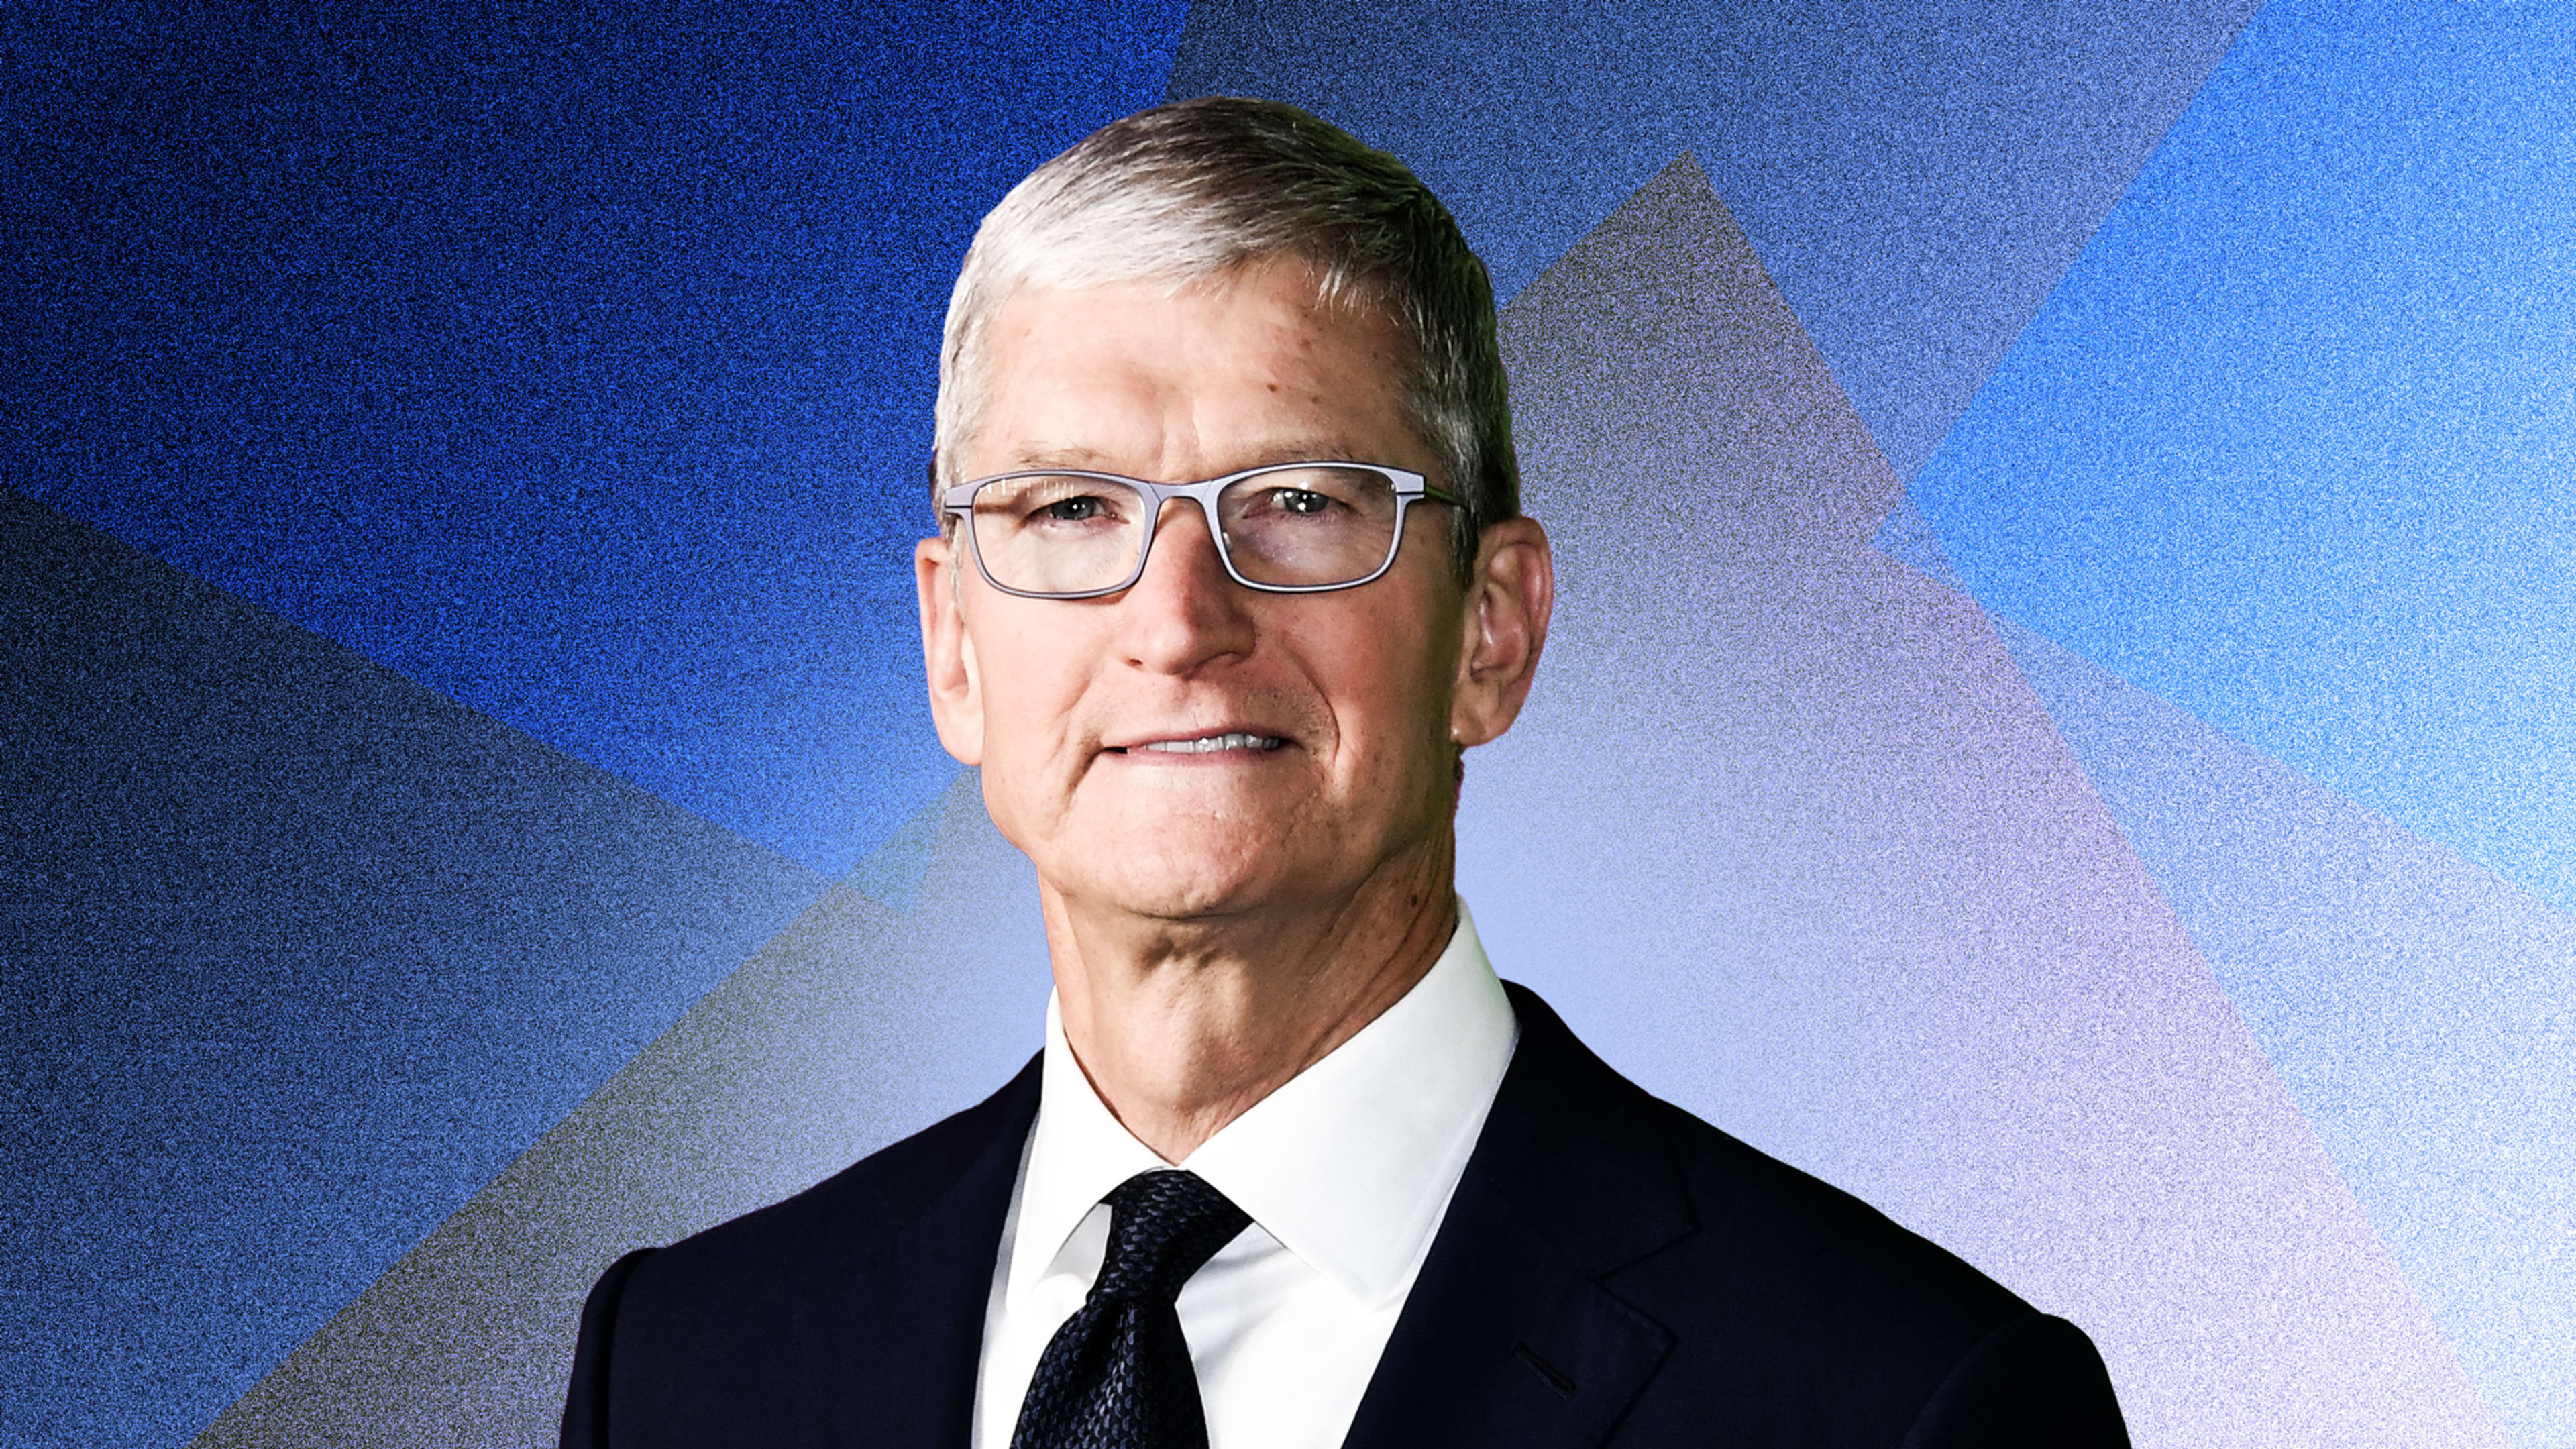 These are the qualities Tim Cook looks for in job candidates